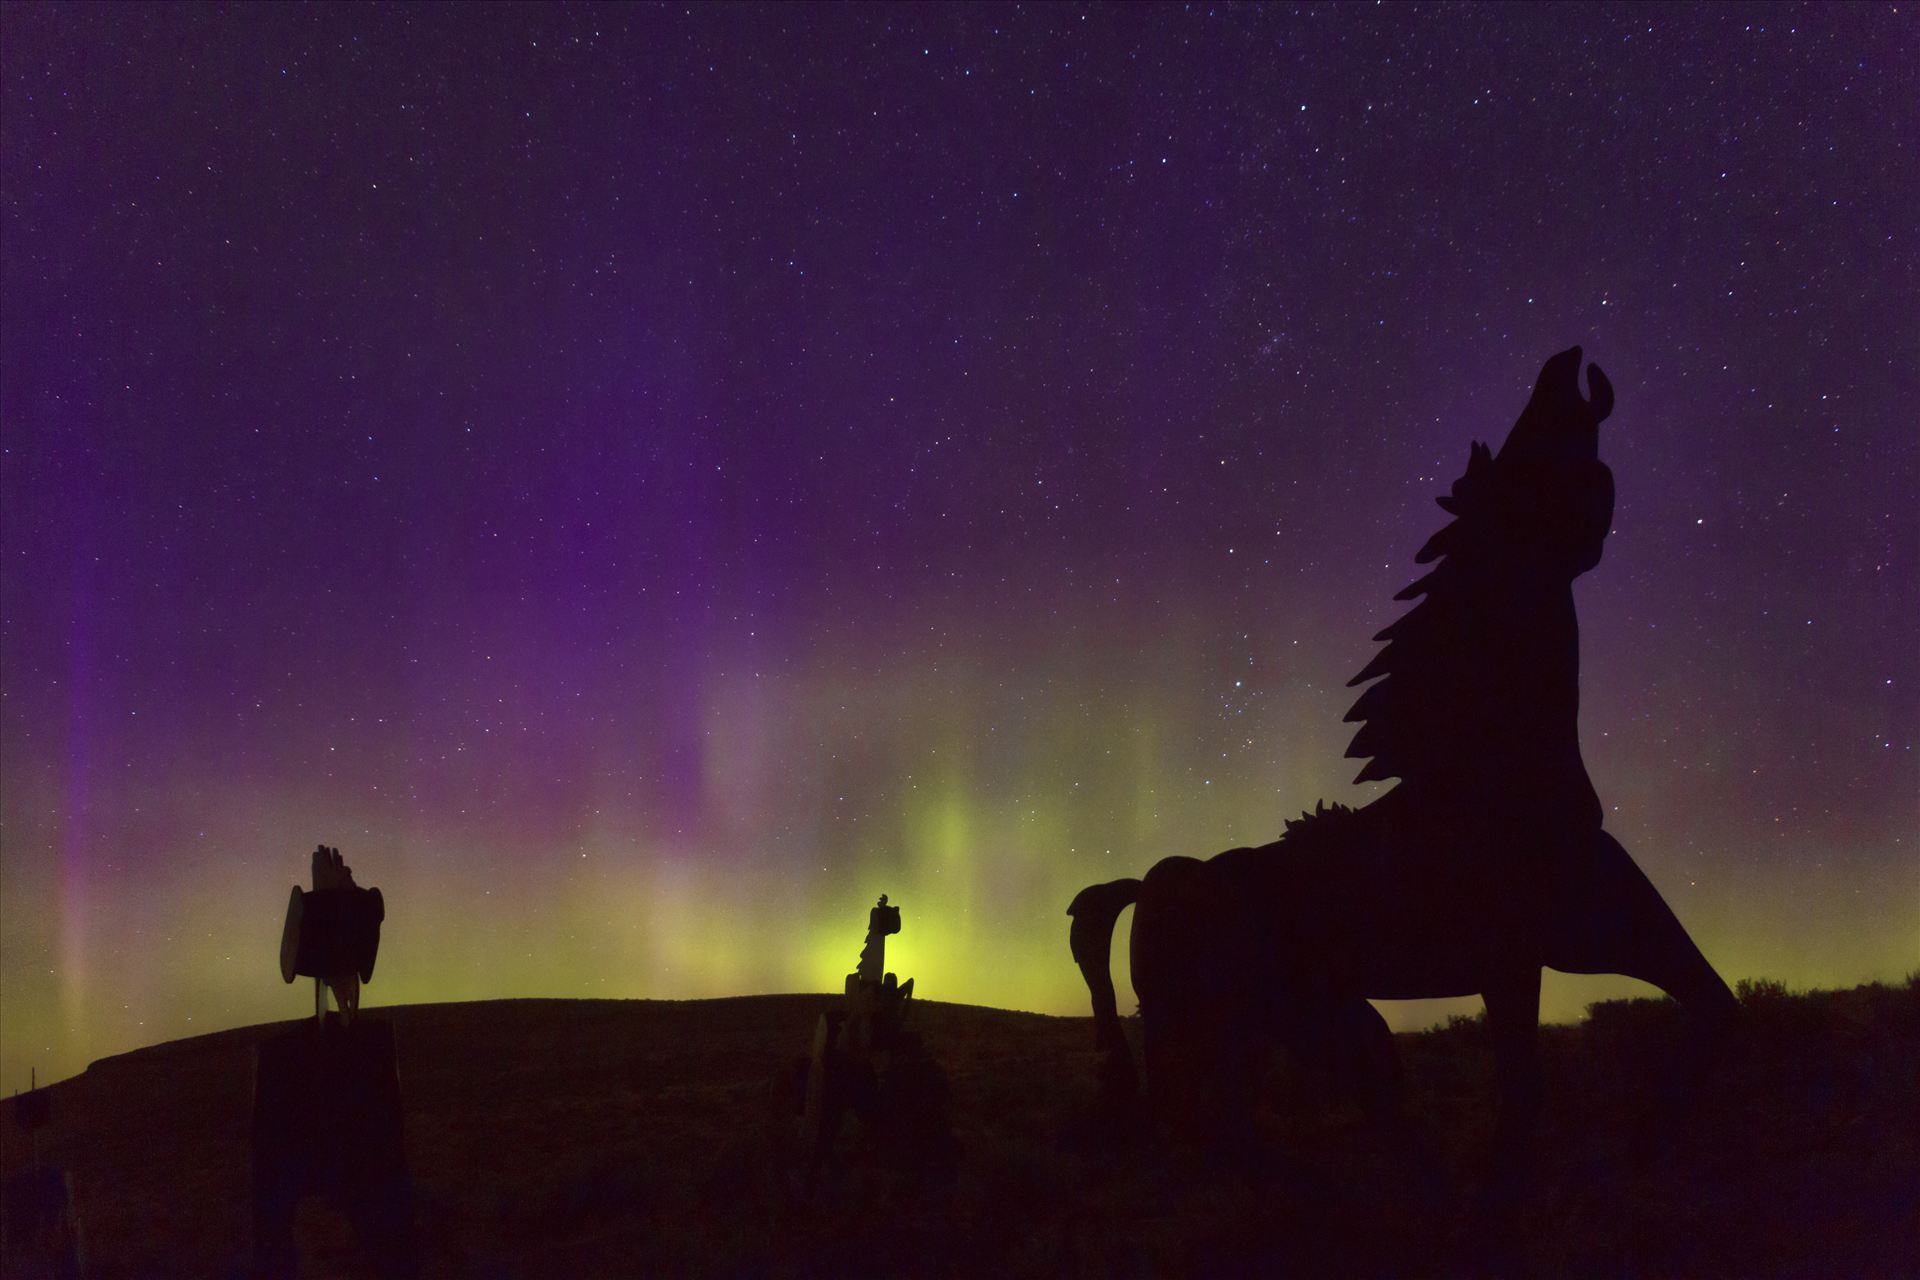 Horseplay in the Northern Lights This was taken at the Wild Horse Monument at Vantage, Washington.  The Auroras put on quite a show that night. by Bear Conceptions Photography